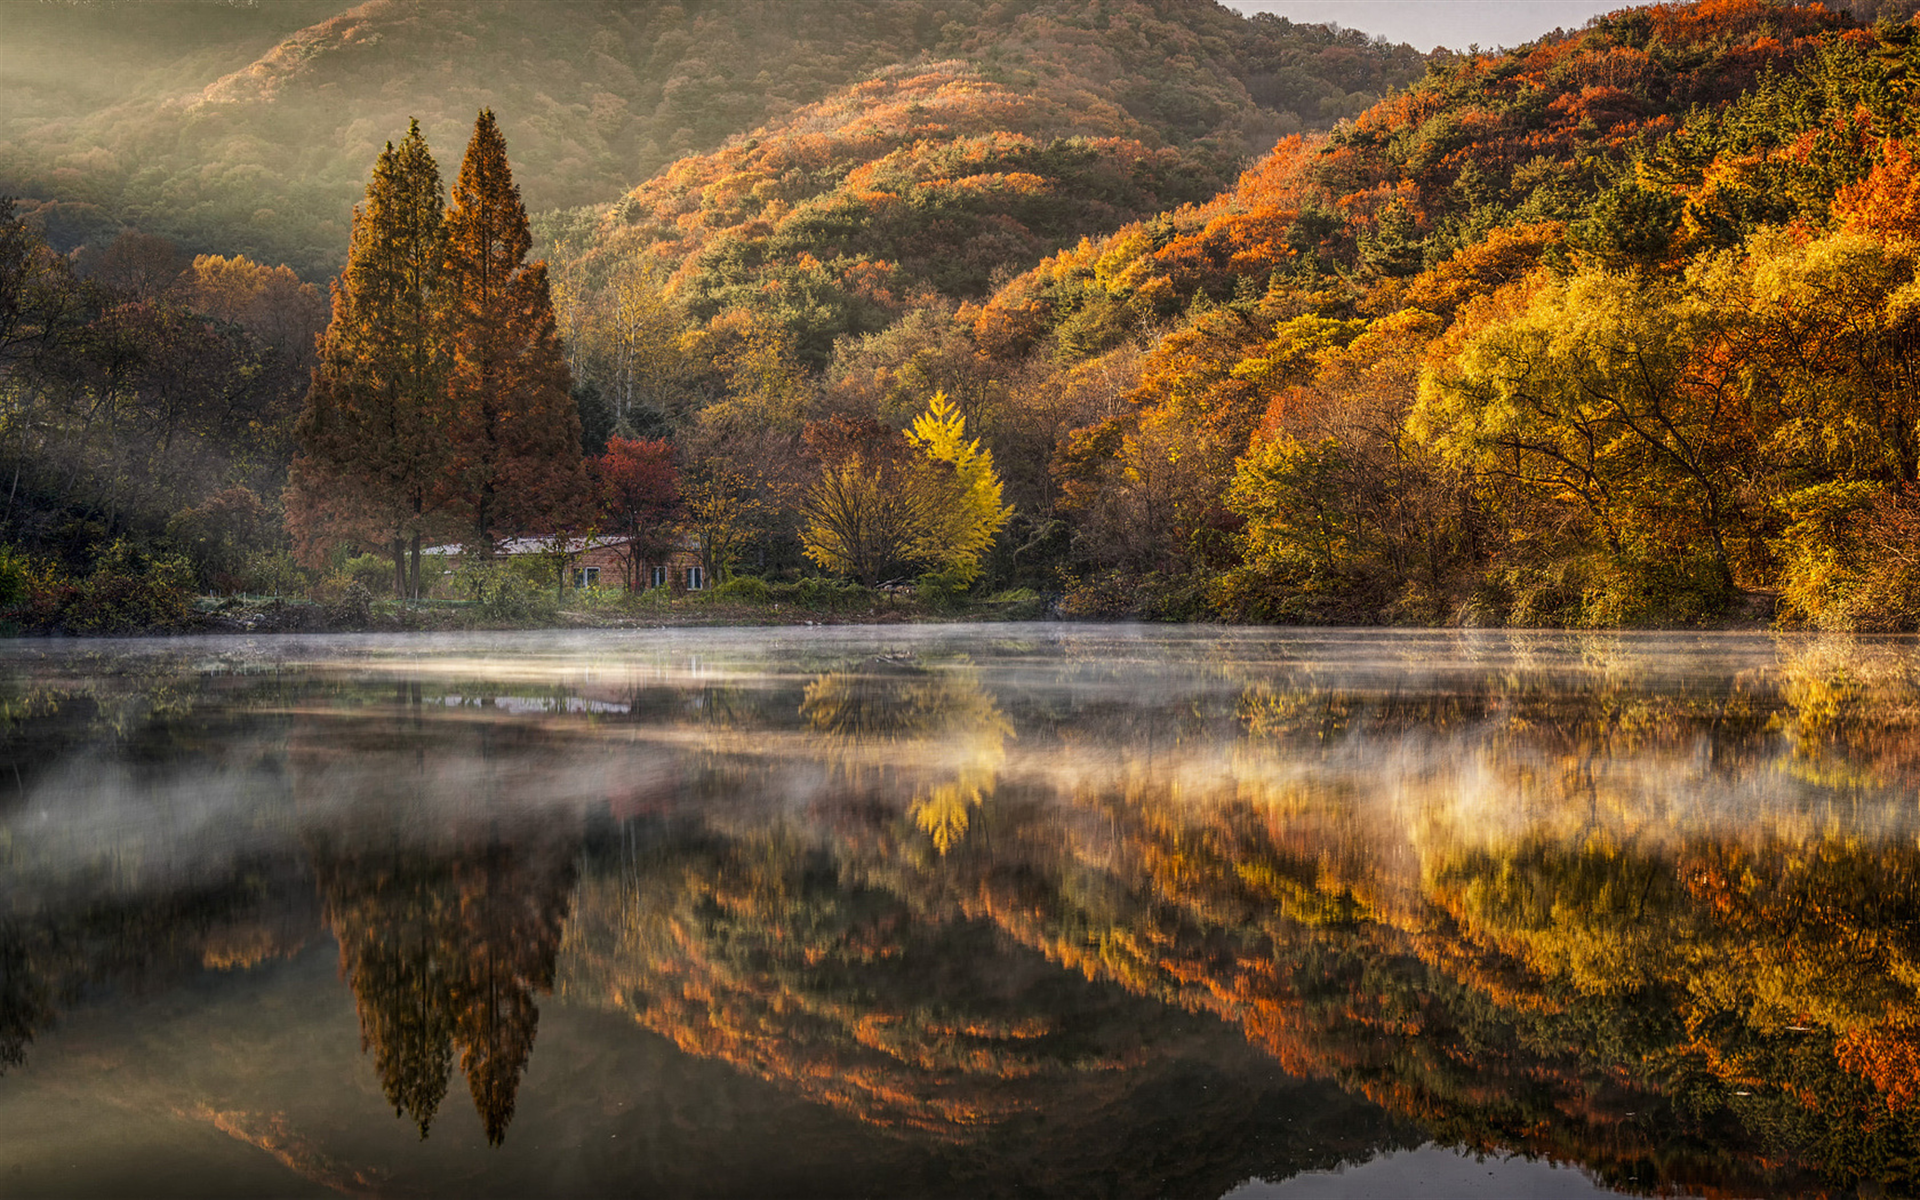 Download wallpaper South Korea, autumn, hills, lake, fog, forest, Asia for desktop with resolution 1920x1200. High Quality HD picture wallpaper